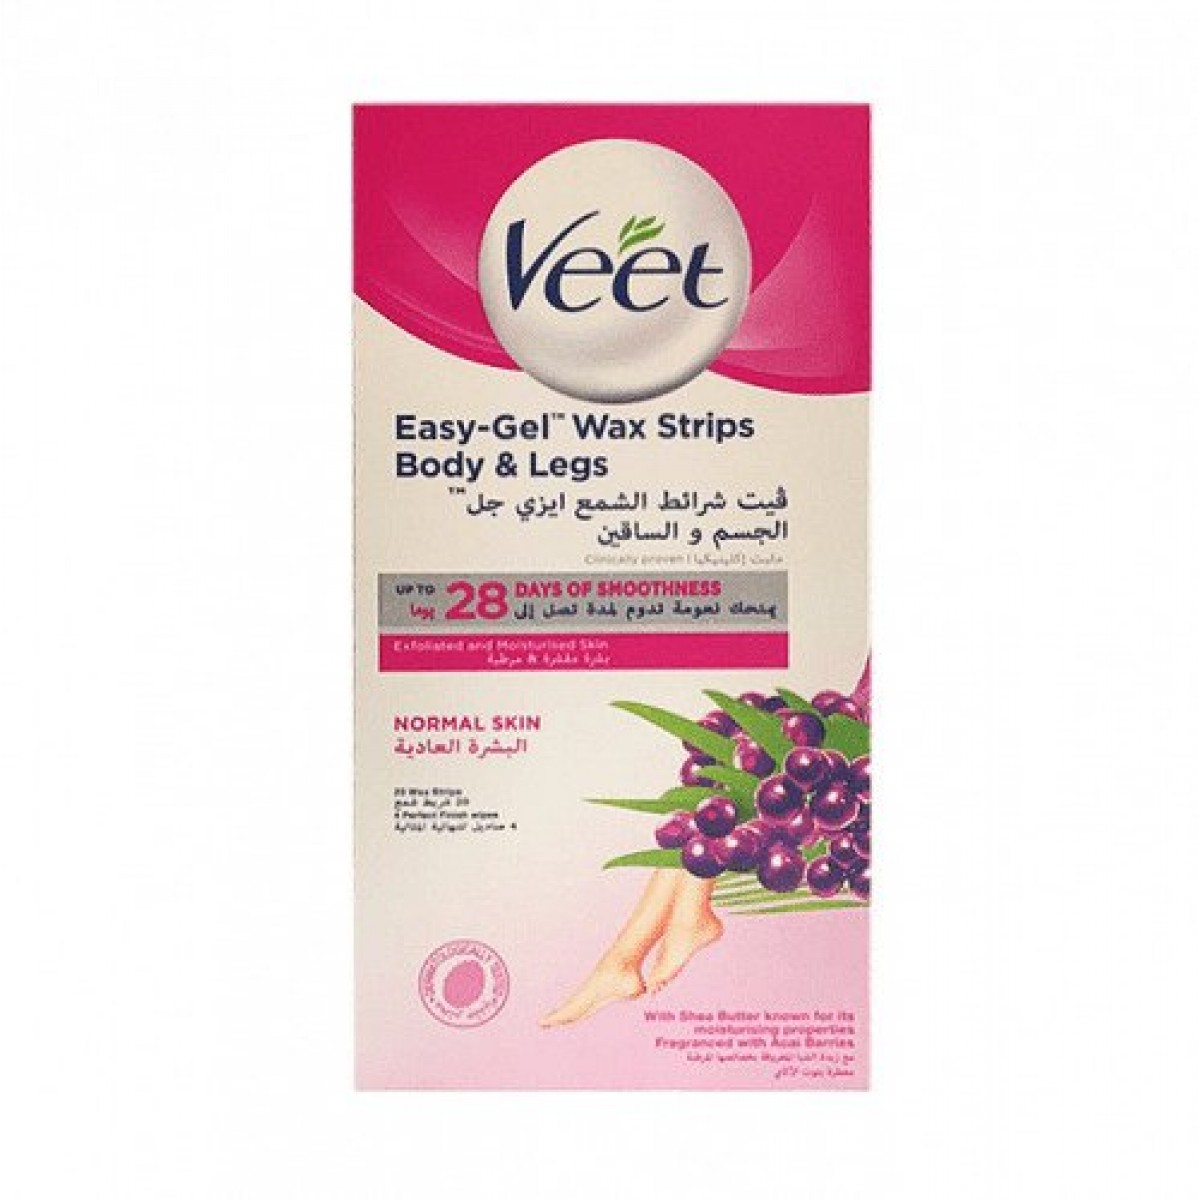 Veet Hair Removal Wax Strips For Normal Skin, 20 Strips Pink